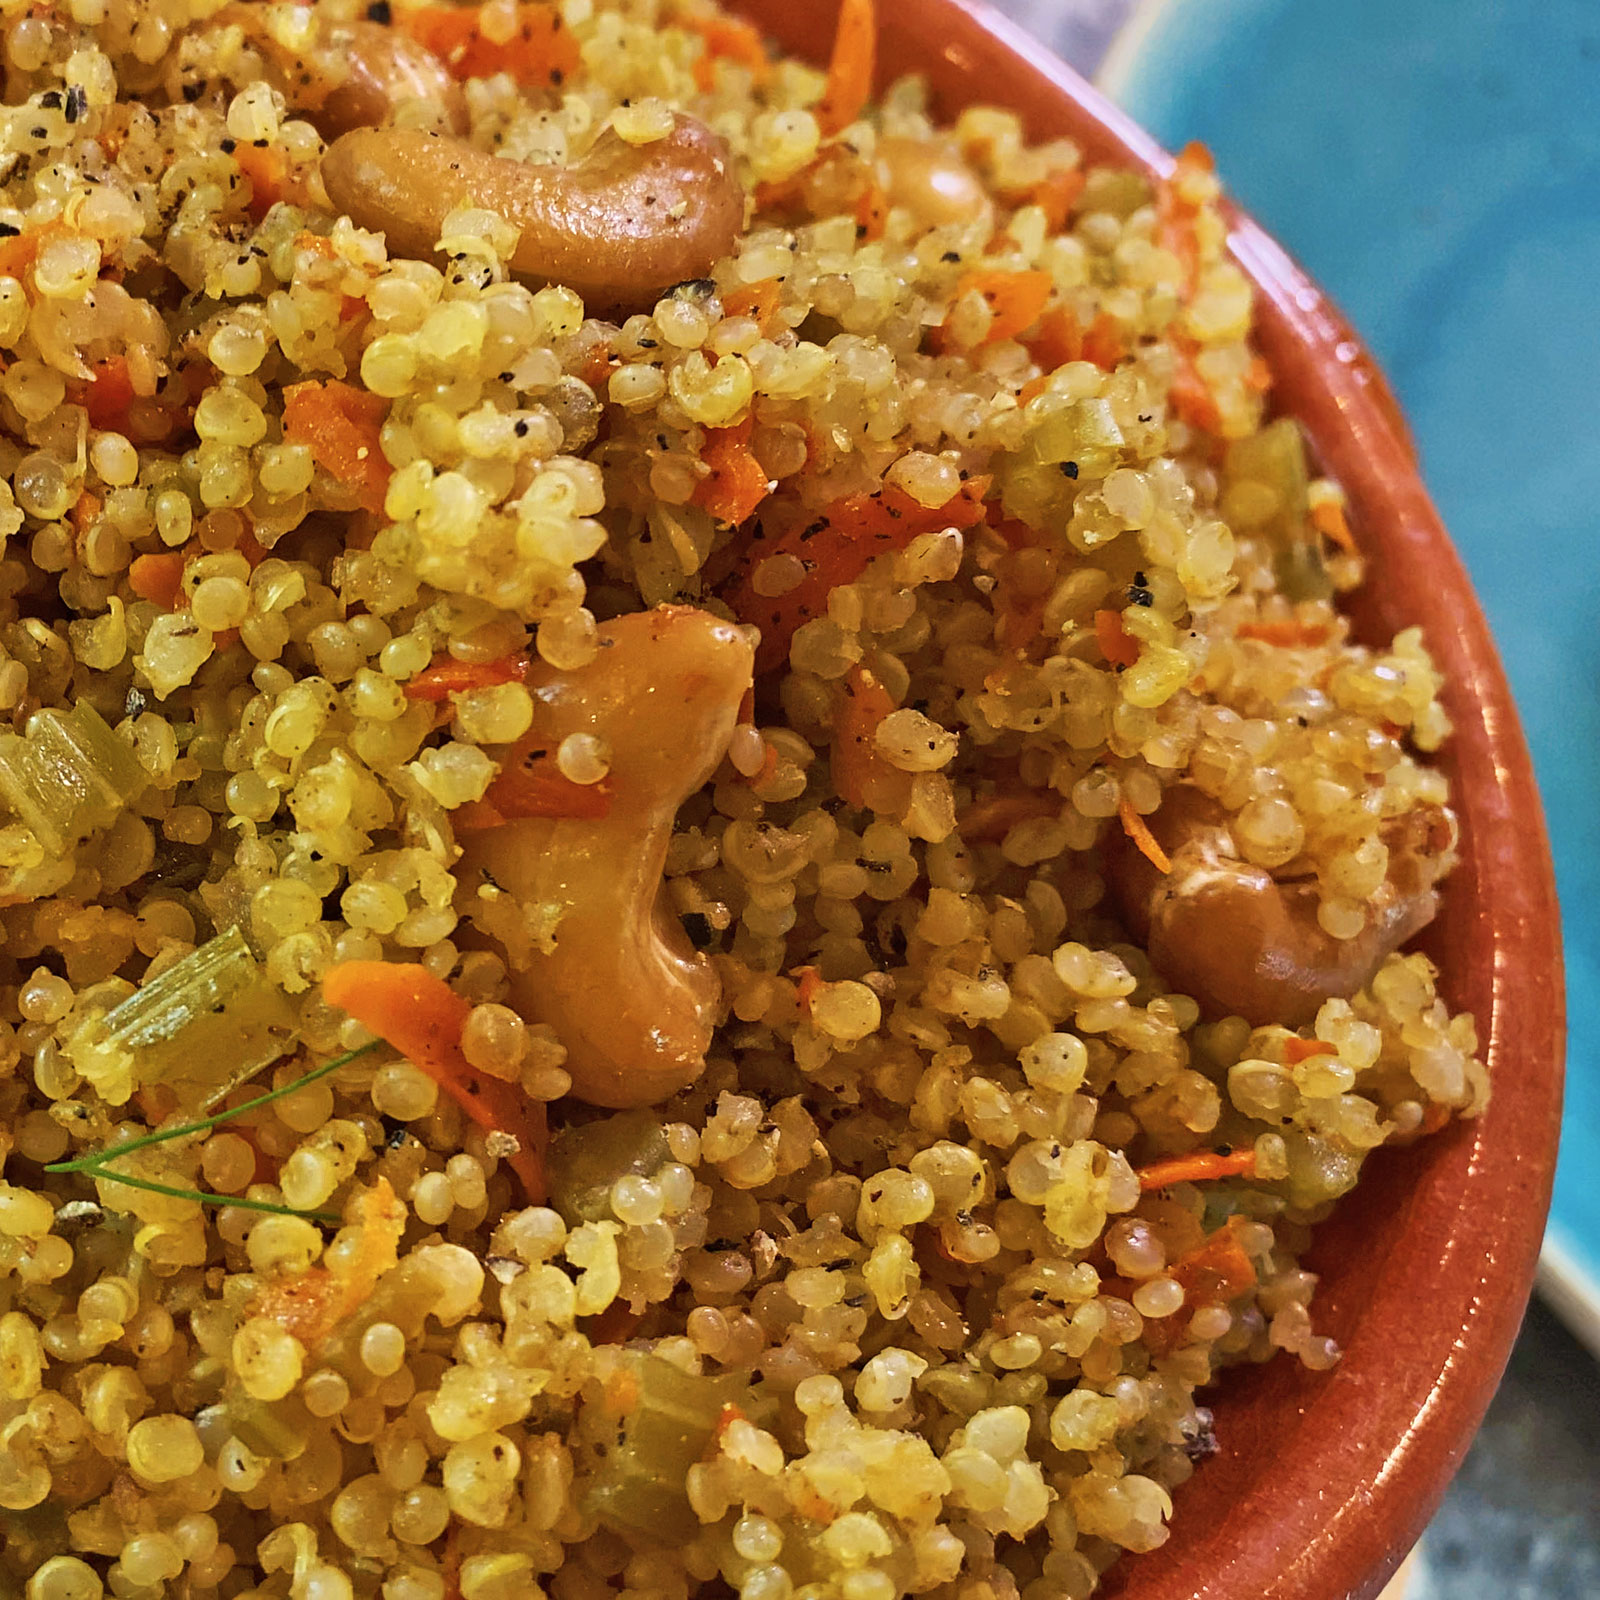 Easy protein-packed one-pot vegan quinoa recipe. This sattvic quinoa dish is made only of positive pranic ingredients. Perfect for lunch or dinner this nourishing vegan quinoa is well-loved in my home